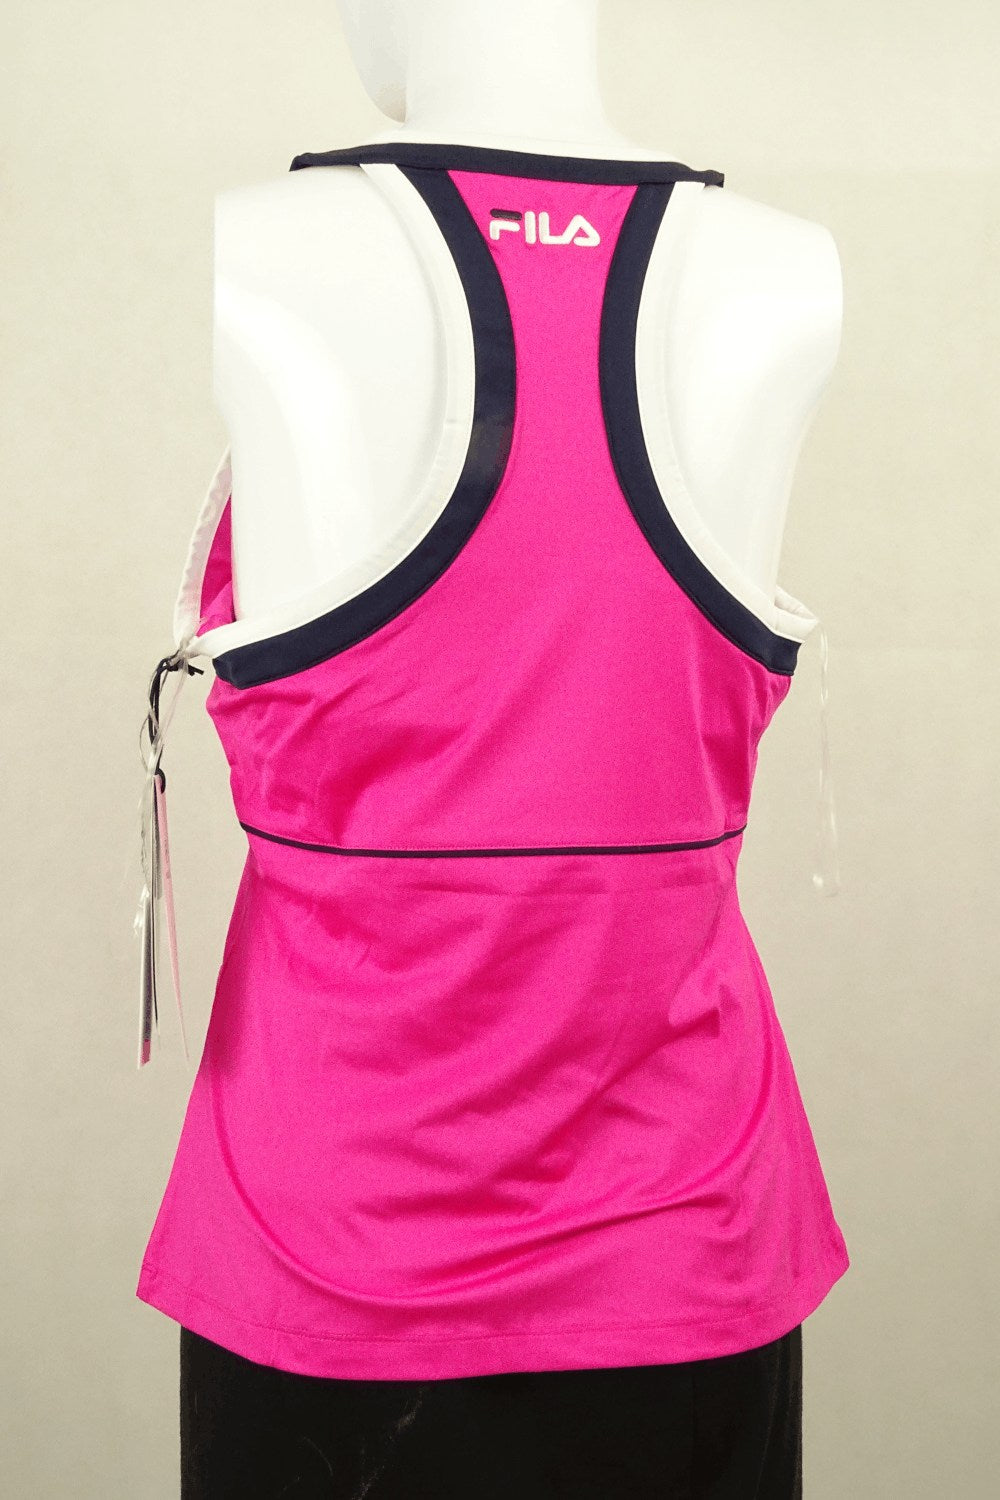 Fila Pink Sports Top M/12 New With Tags